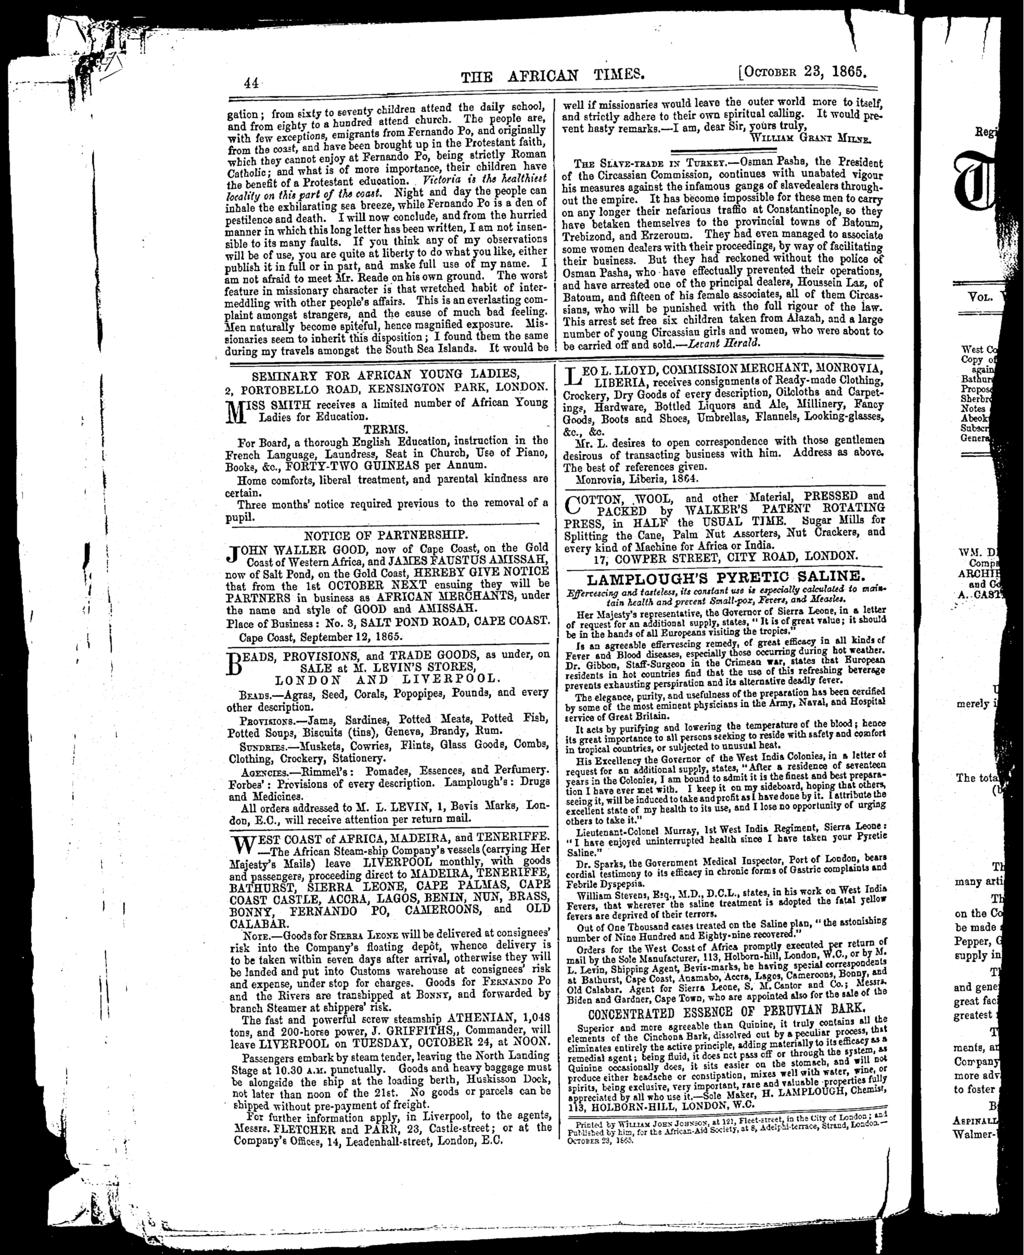 44 THE AFRCAN TMES. OCTOBER 23, 1865.